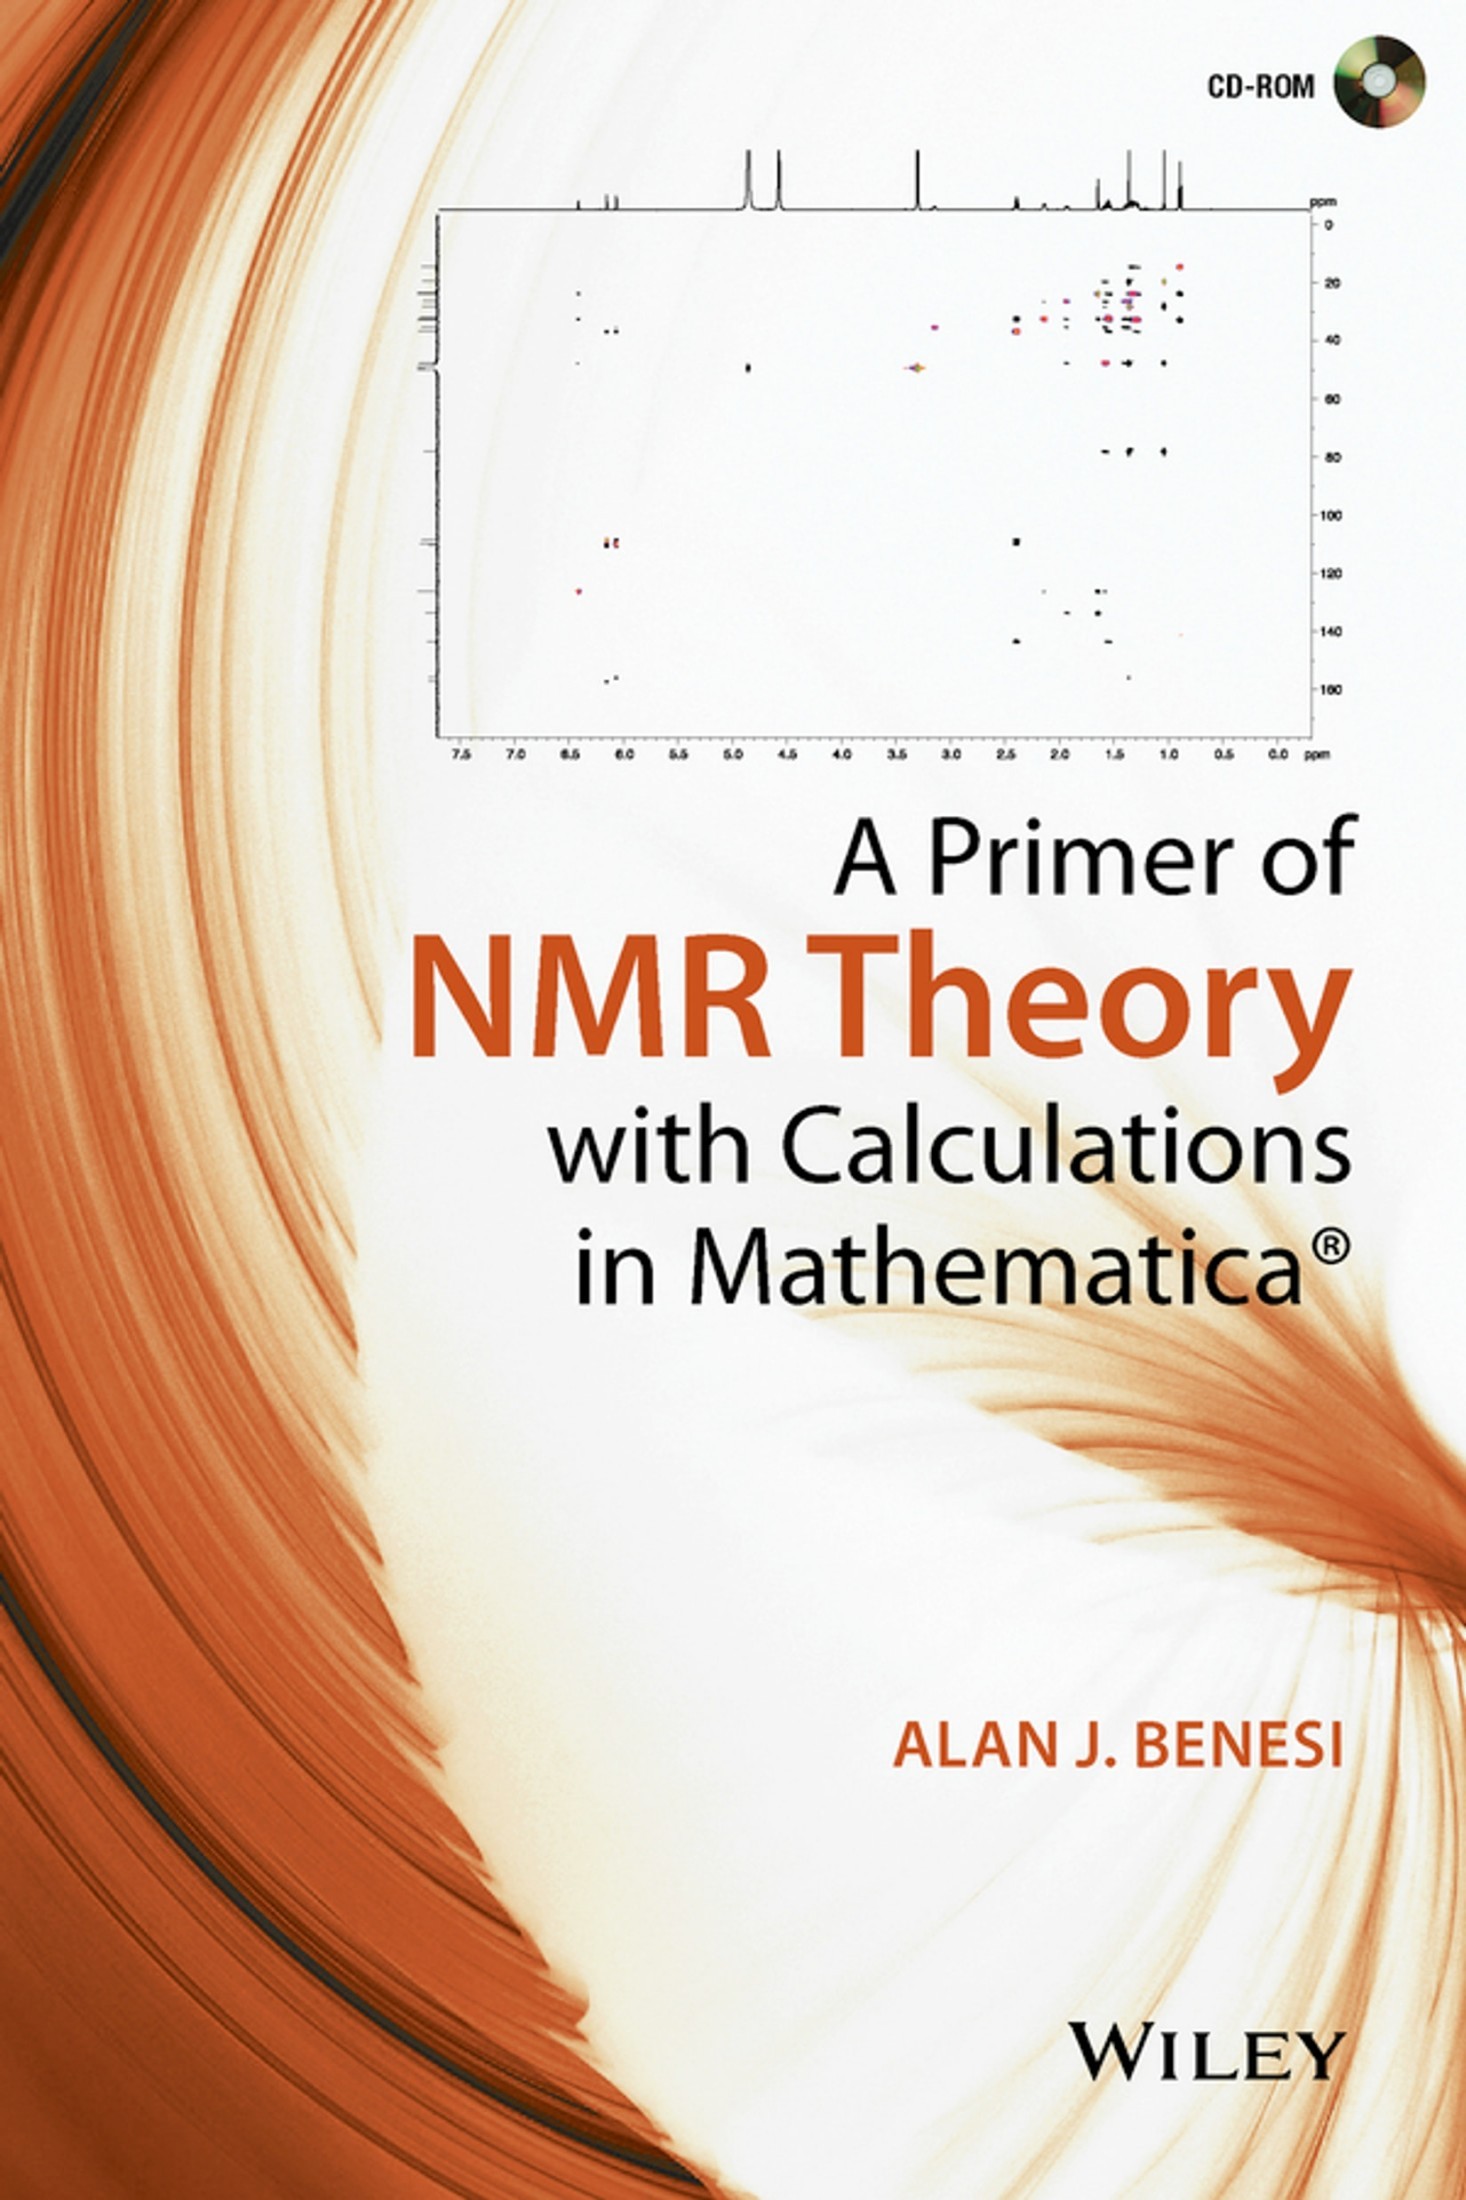 A Primer of NMR Theory with Calculations in Mathematica®